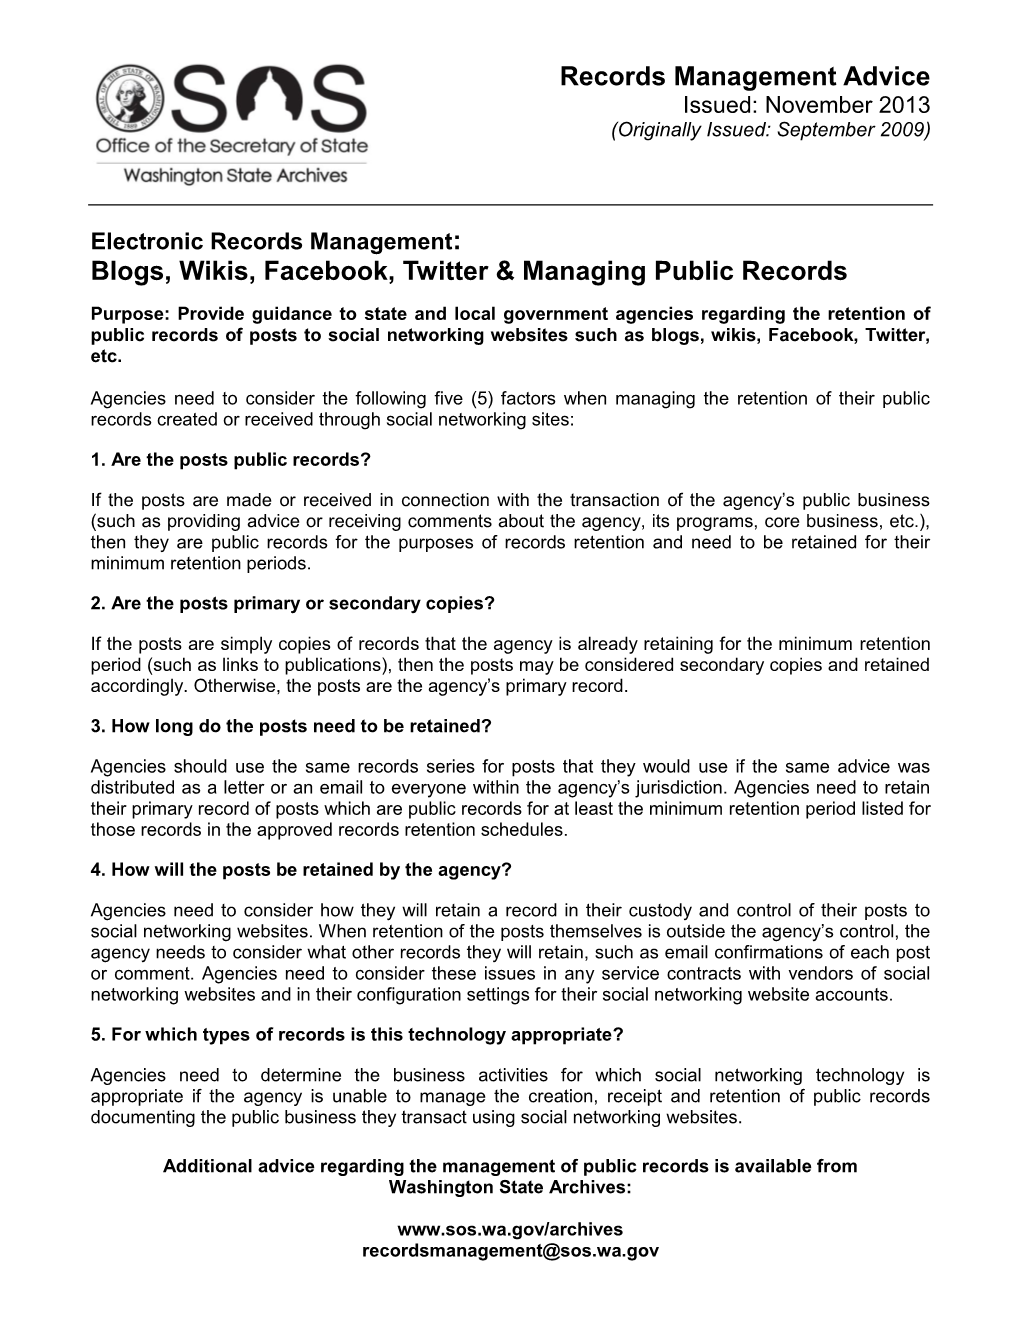 Blogs, Wikis, Facebook, Twitter & Managing Public Records